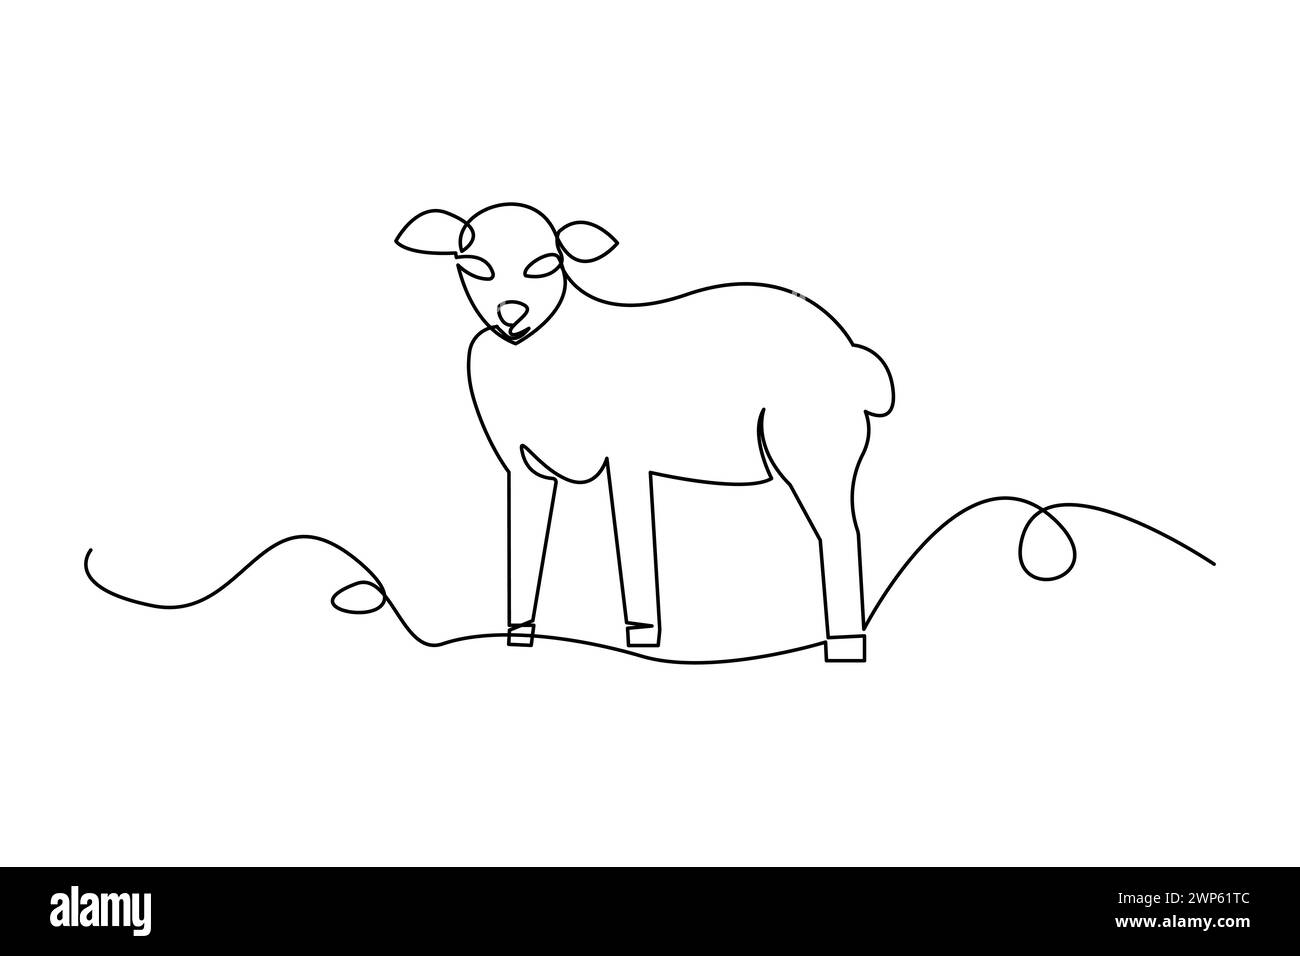 Minimalistic line drawing of a sheep standing on a continuous line landscape. Vector illustration. EPS 10. Stock Vector